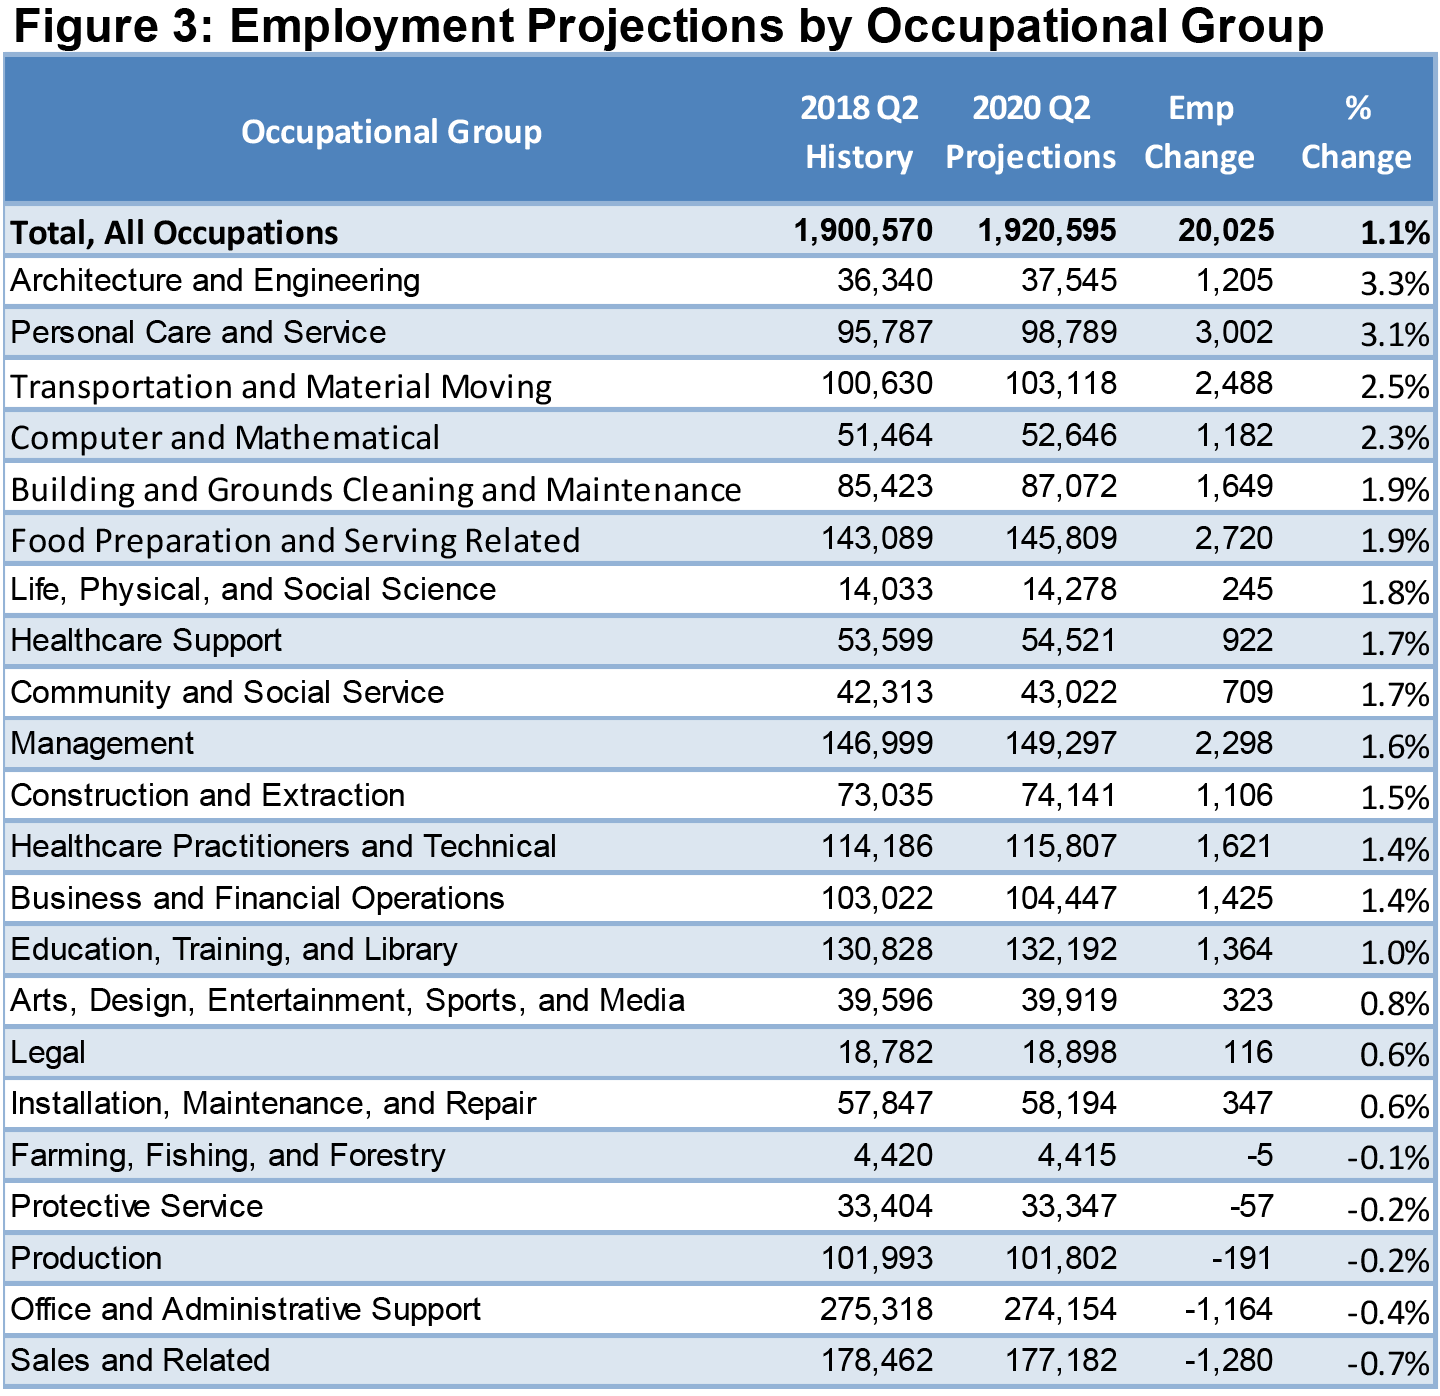 Figure 3: Employment Projections by Occupational Group